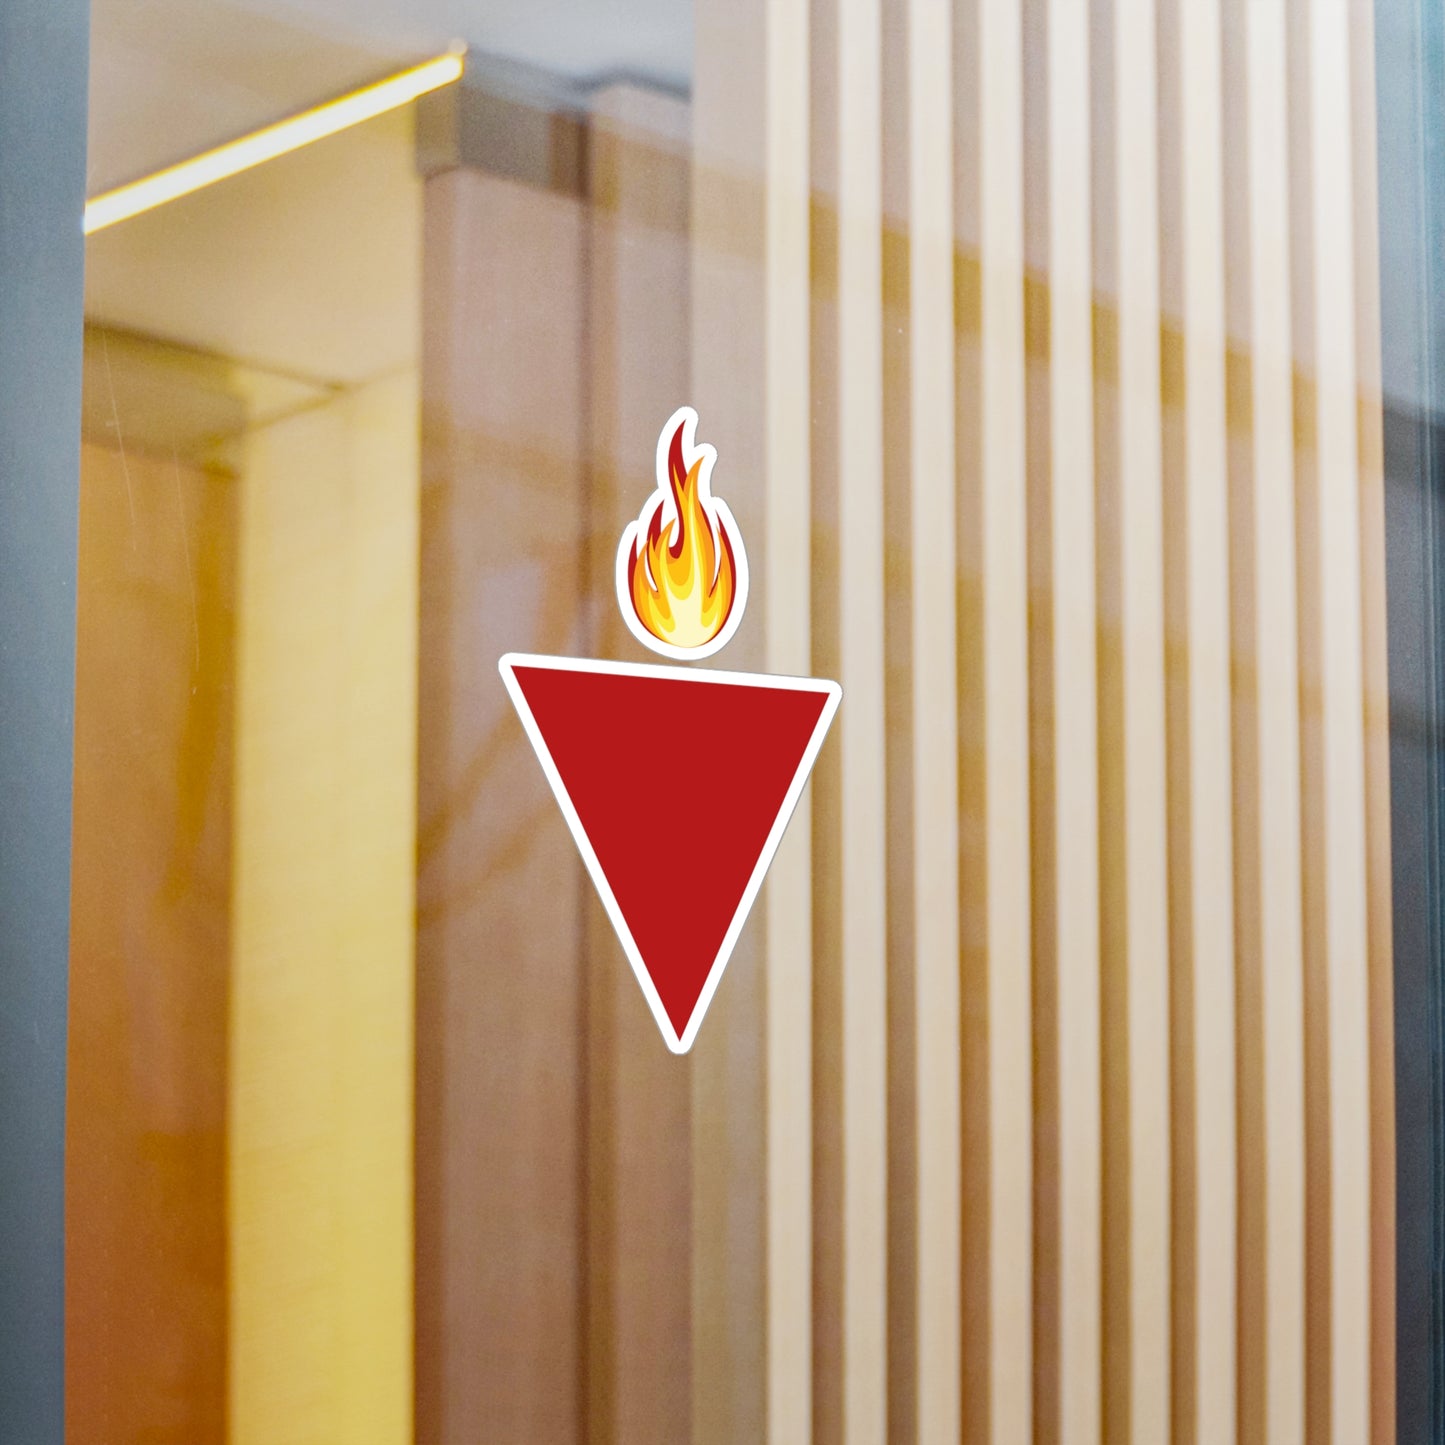 Red Triangle on Fire Palestine Resistance Sticker